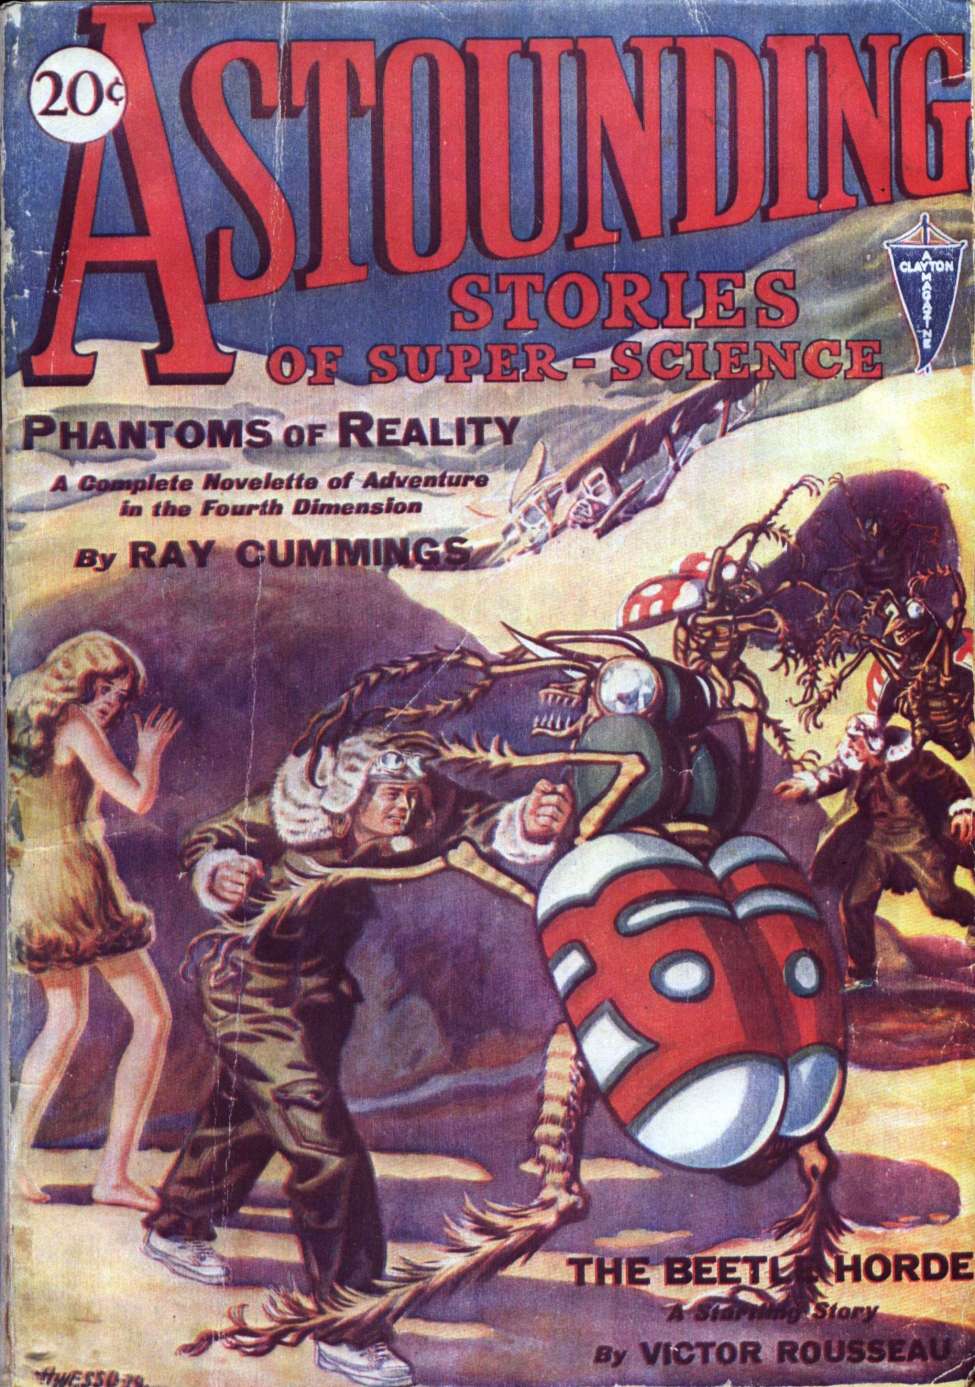 Comic Book Cover For Astounding Serial - The Beetle Horde - V Rousseau